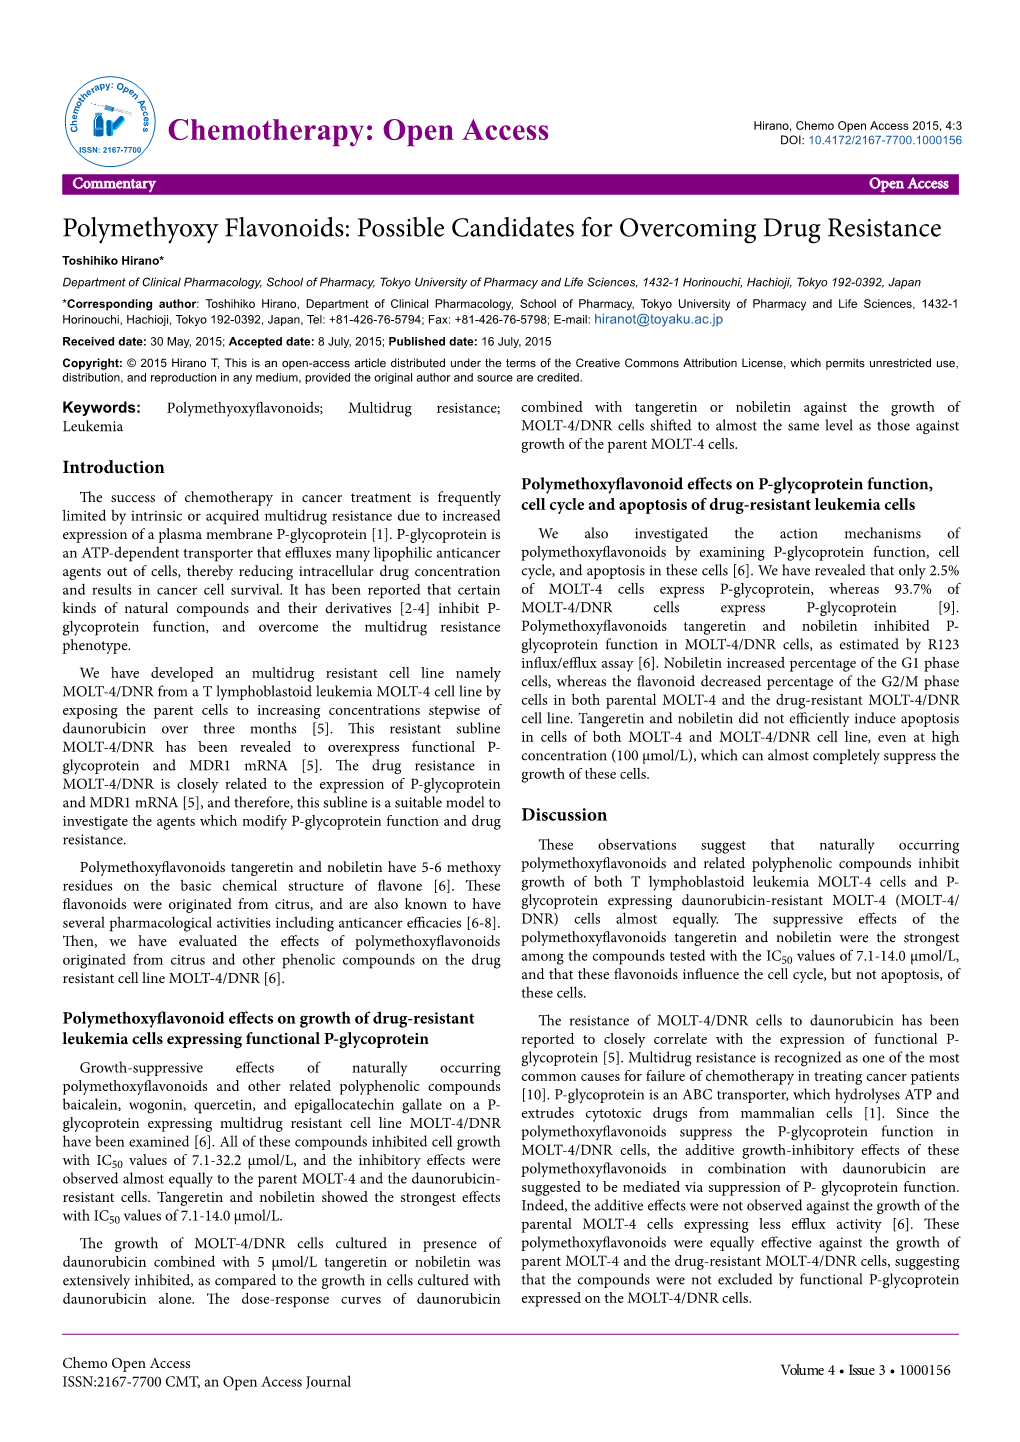 Possible Candidates for Overcoming Drug Resistance